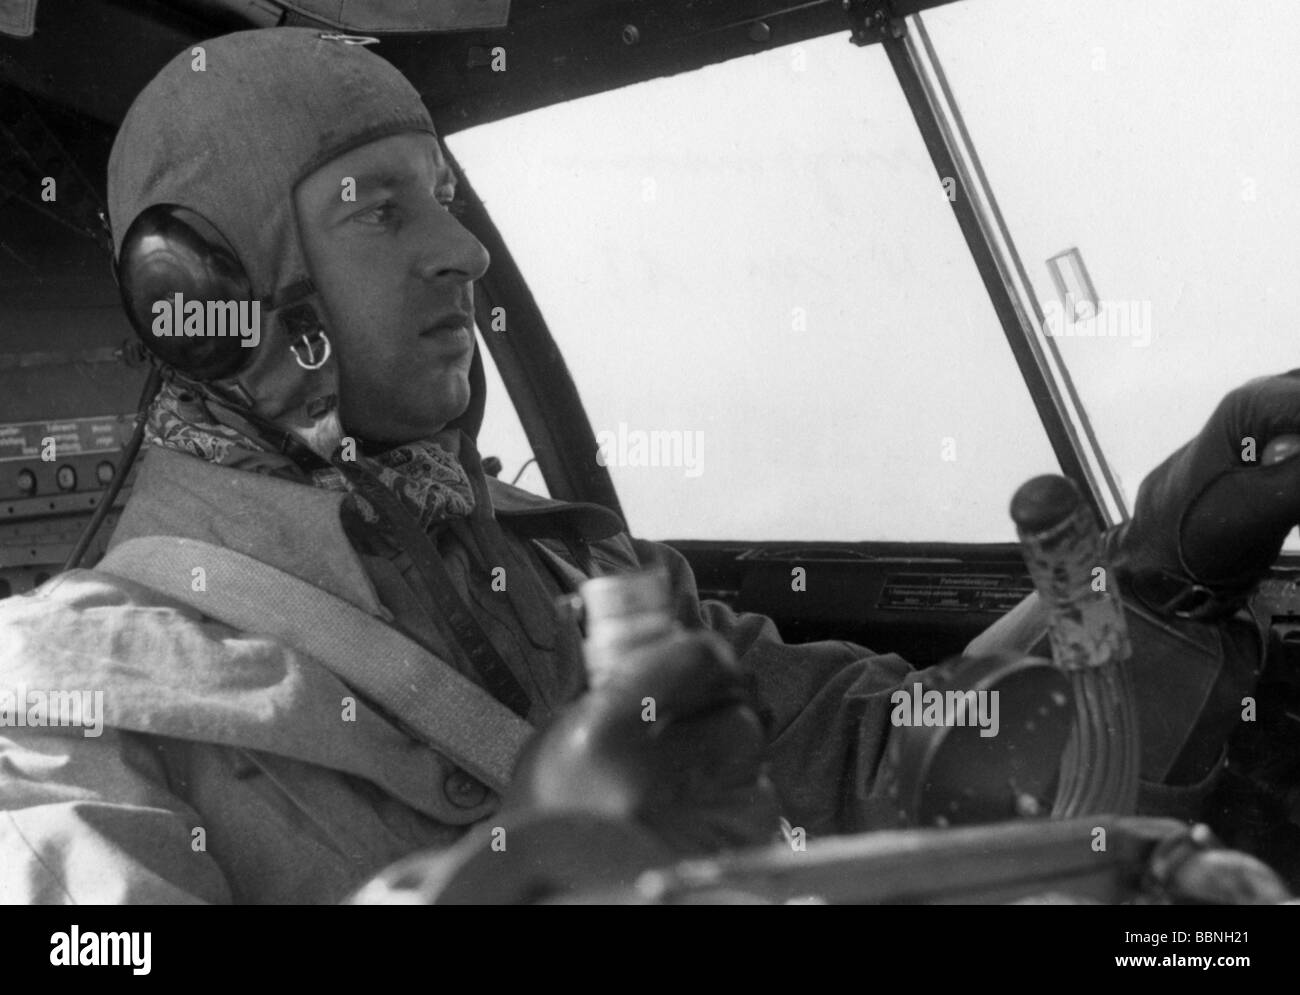 events, Second World War / WWII, aerial warfare, persons, Luftwaffe pilot in the cockpit of a bomber Heinkel 111 during a mission against Great Britain, August 1940, 20th century, historic, historical, Wehrmacht, Germany, Third Reich, soldier, soldiers, uniform, uniforms, flying cap, caps, suit, Battle of Britain, He111, He-111, steering stick, aviator, aviators, pilots, Hauptmann Lonicer, captain, England, people, 1940s, Stock Photo